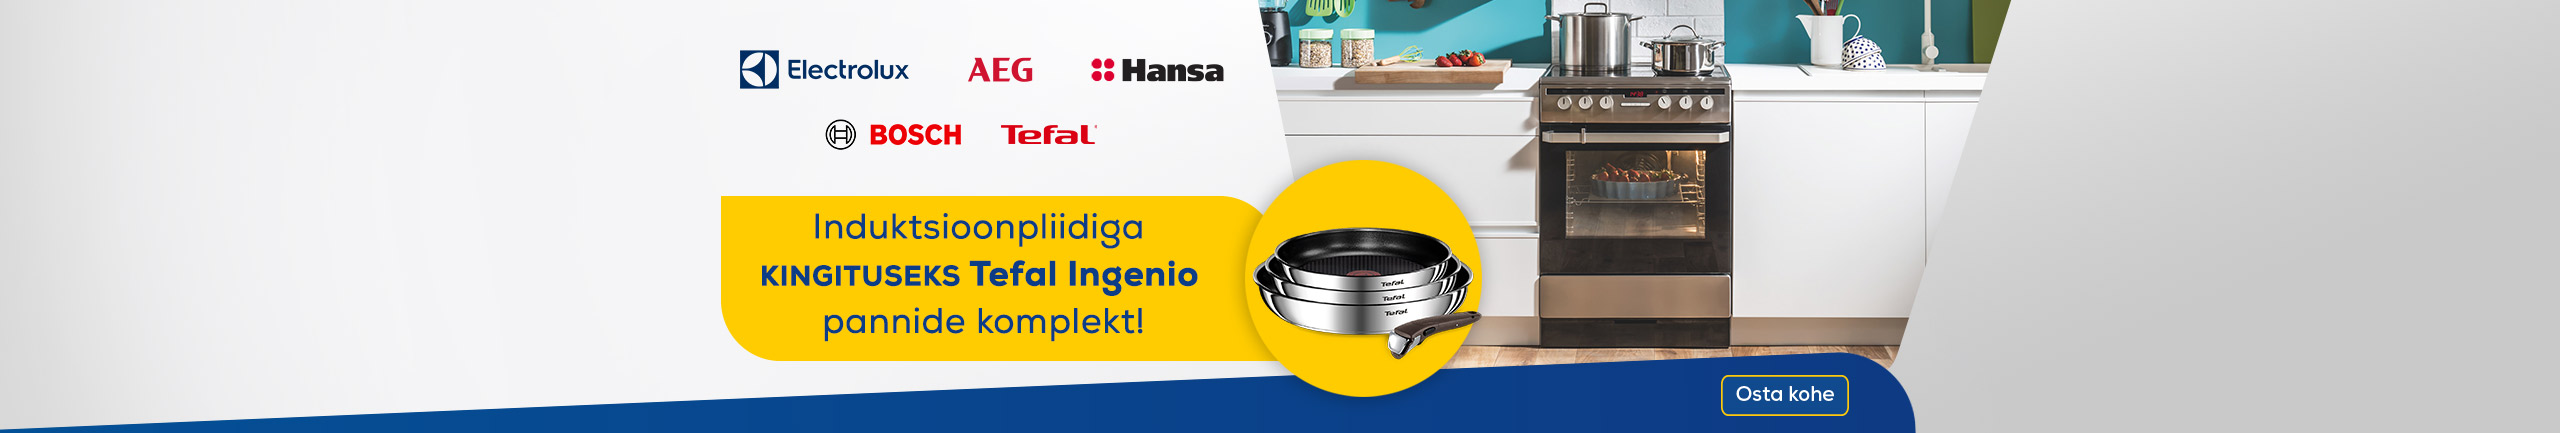 Free set of Tefal Ingenio pans with an induction cooker!